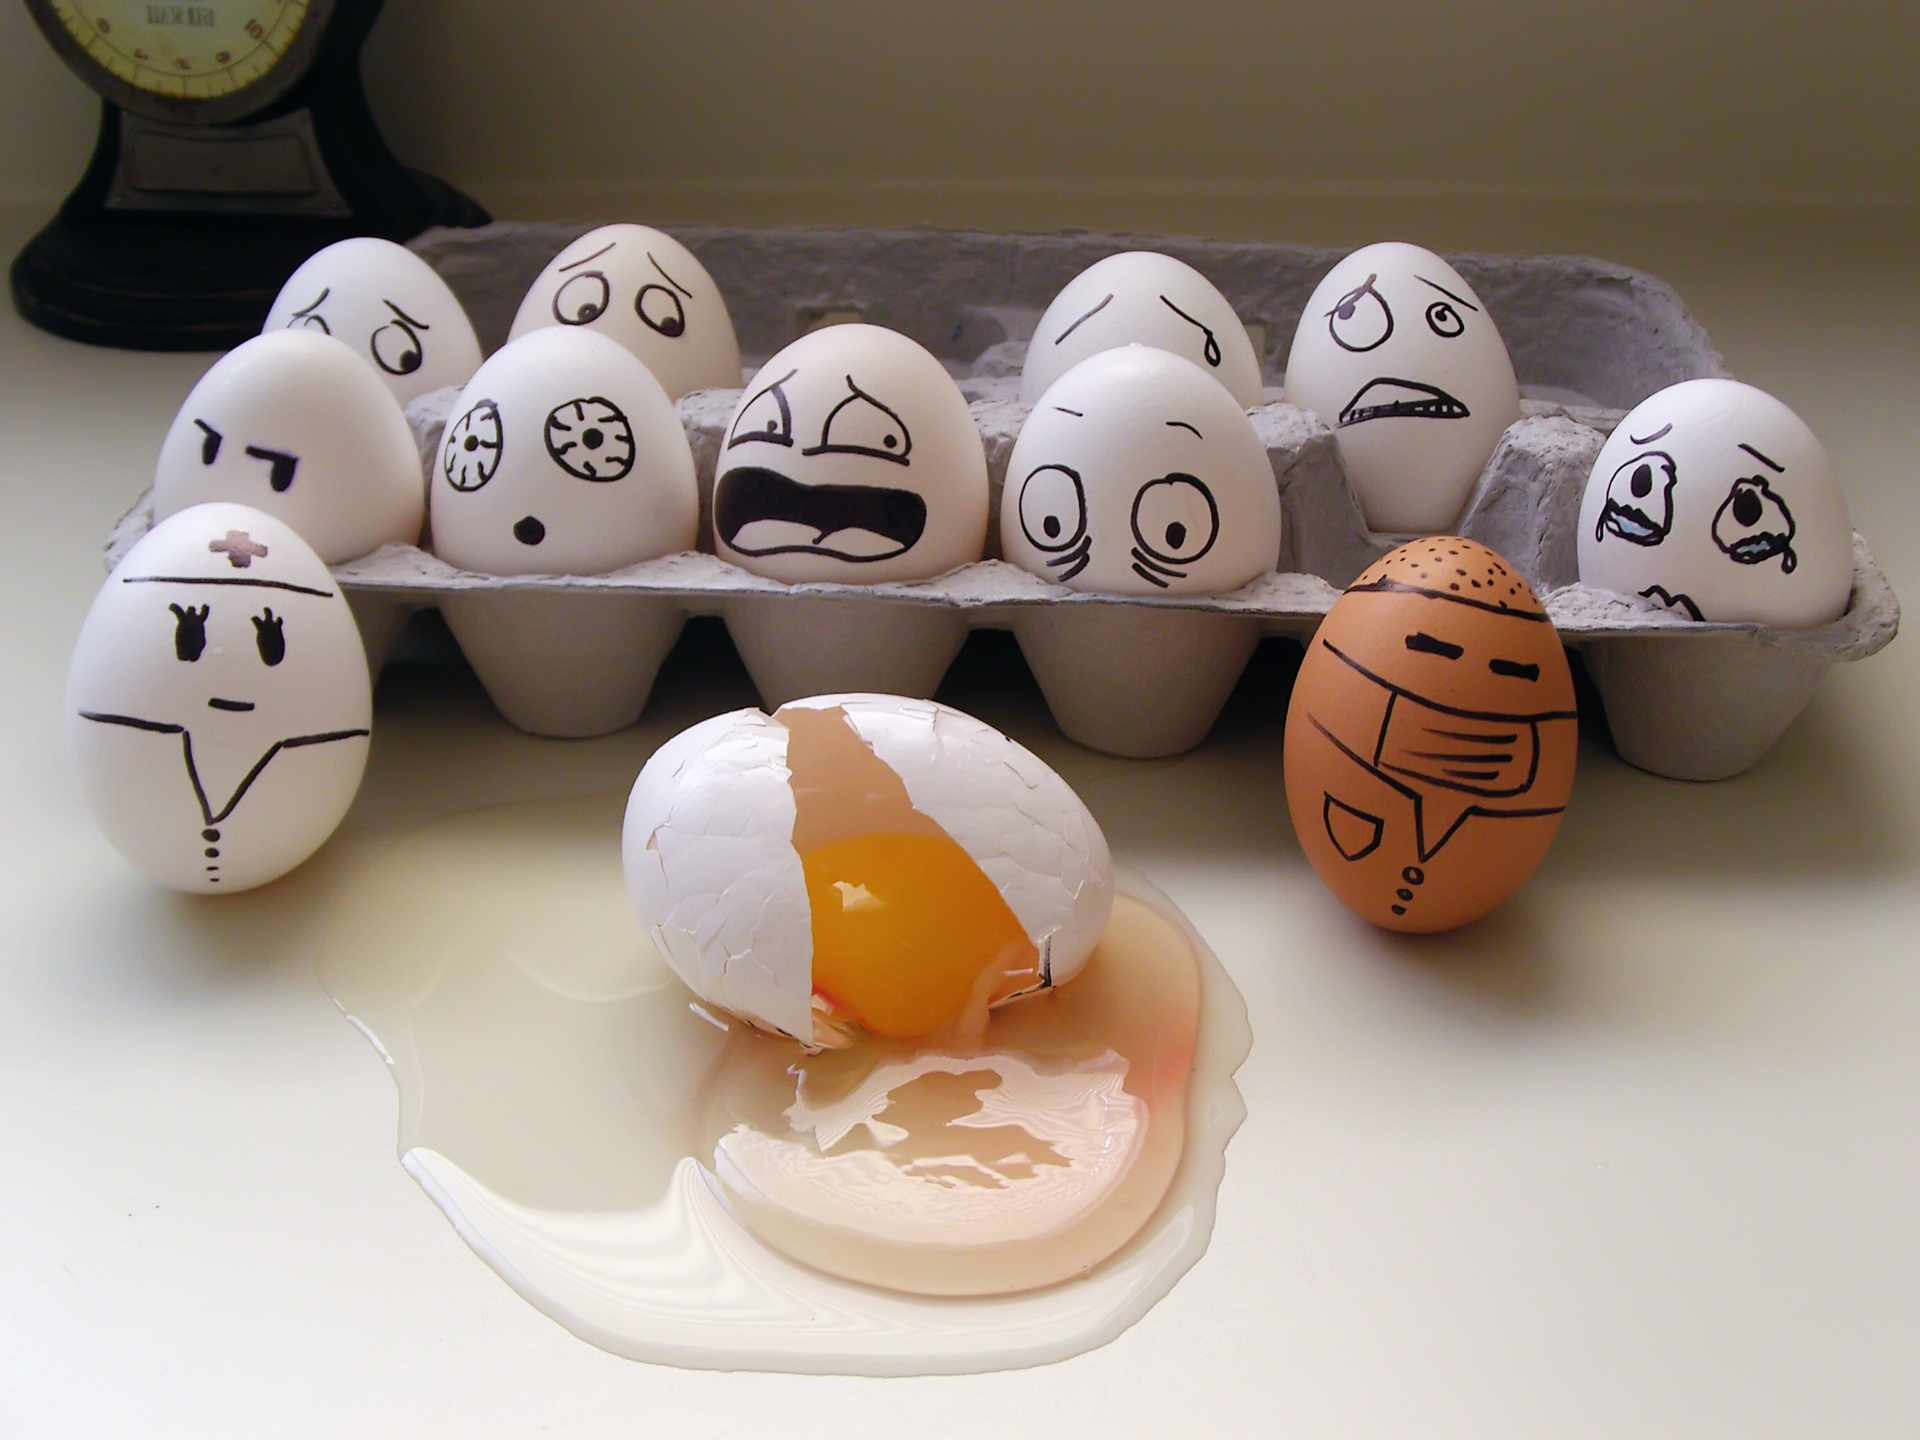 Egg emotions humor Wallpapers HD / Desktop and Mobile Backgrounds